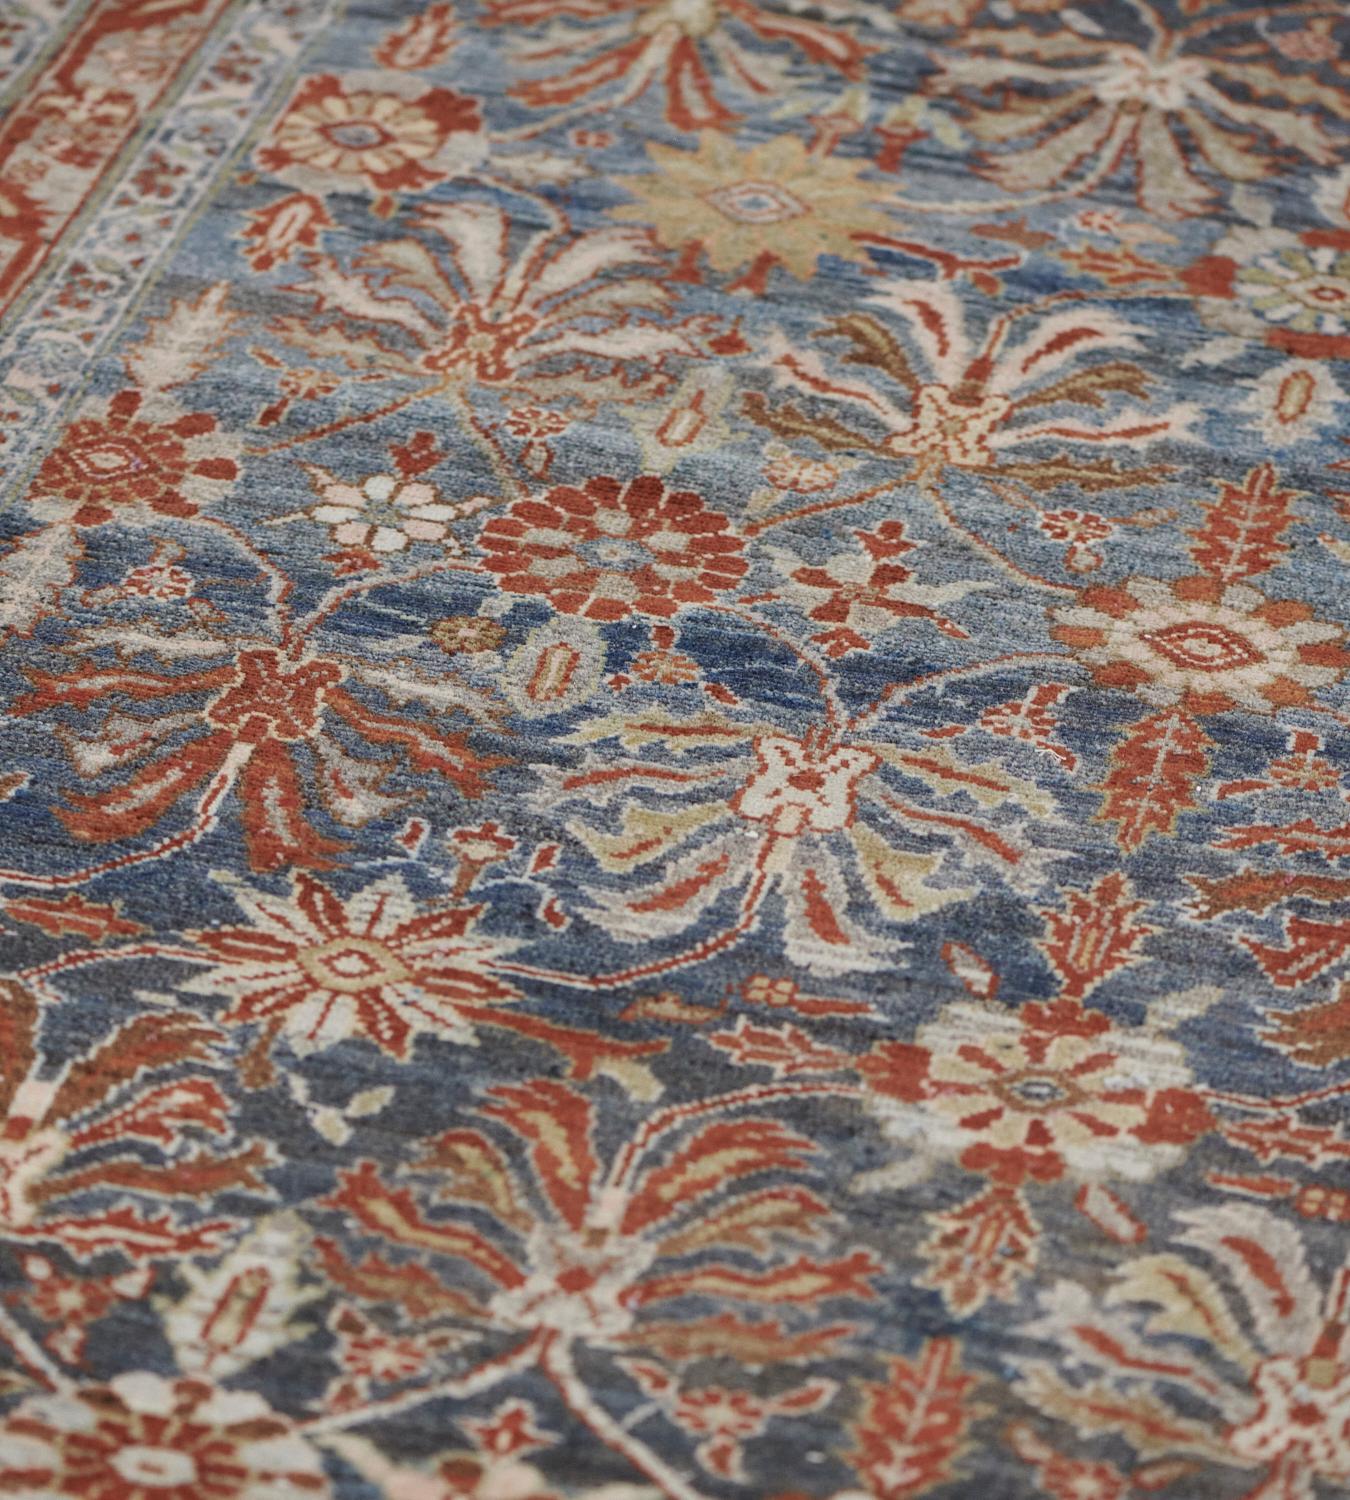 This antique Malayer rug has a shaded blue field with an overall design of ivory, fox-brown and sandy-yellow palmettes and stylized flowering plants linked by a delicate floral vine, in a narrow light blue border with an angular rust-red serrated